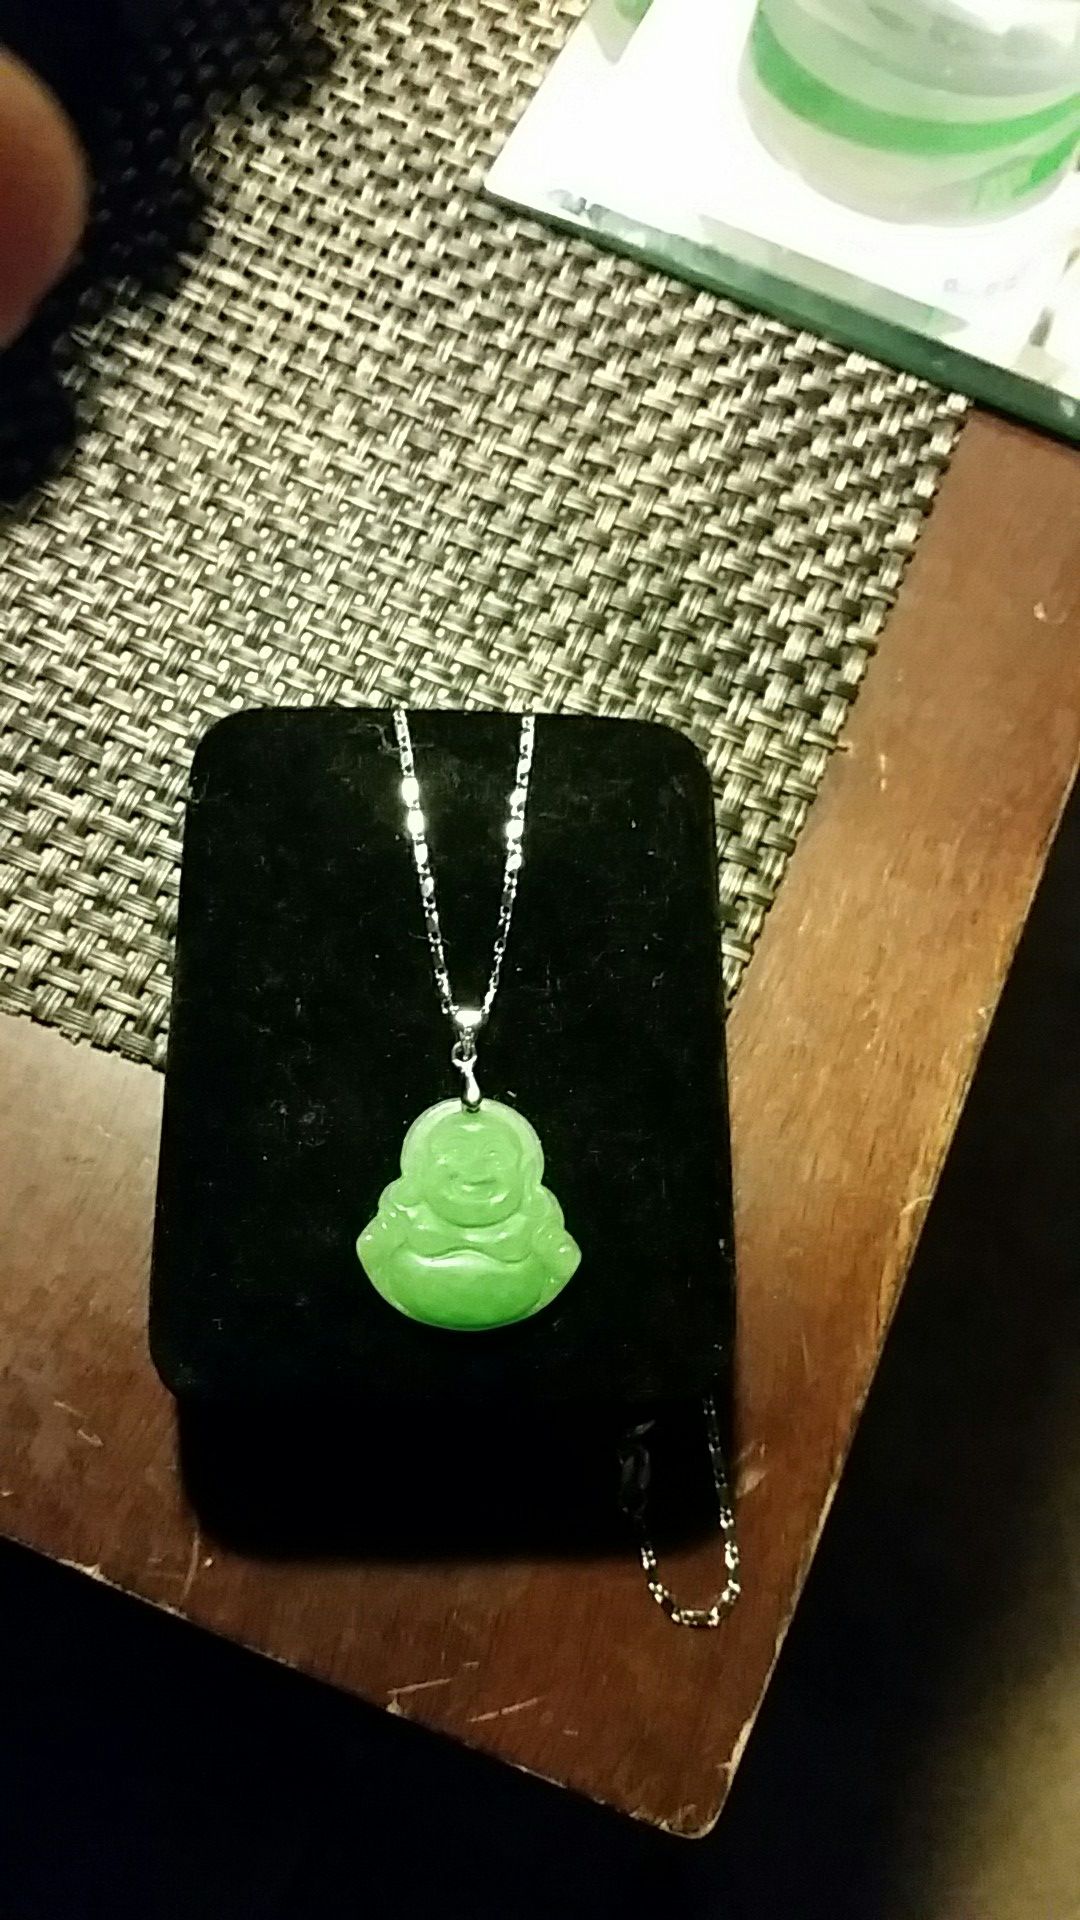 Real JADEe pendant and 925 sterling silver chain with REAL Jade Buddha pendant REAL JADE PENDANT